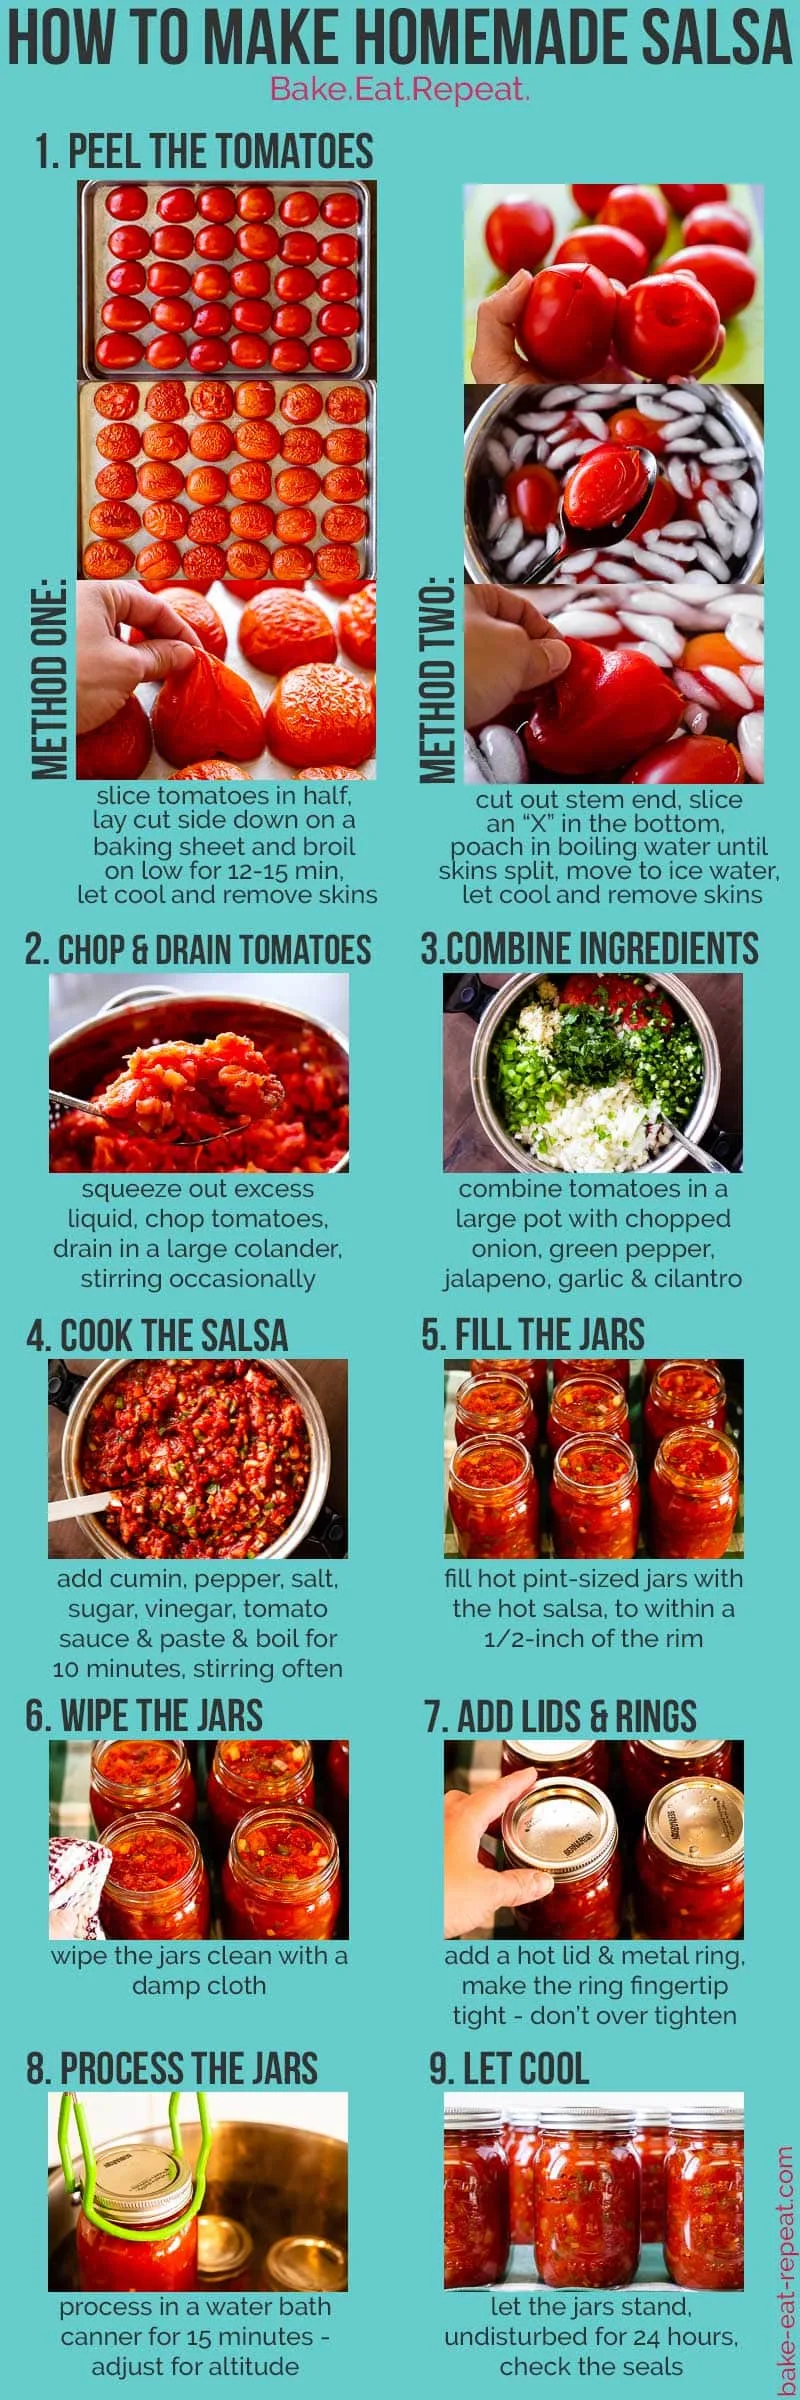 This homemade salsa is so much better then anything you can buy at the store, and is easy to make. You can even can it at home with a water bath canner so you can enjoy fresh tasting, homemade salsa all year long! (It also freezes well if canning isn't your thing!)